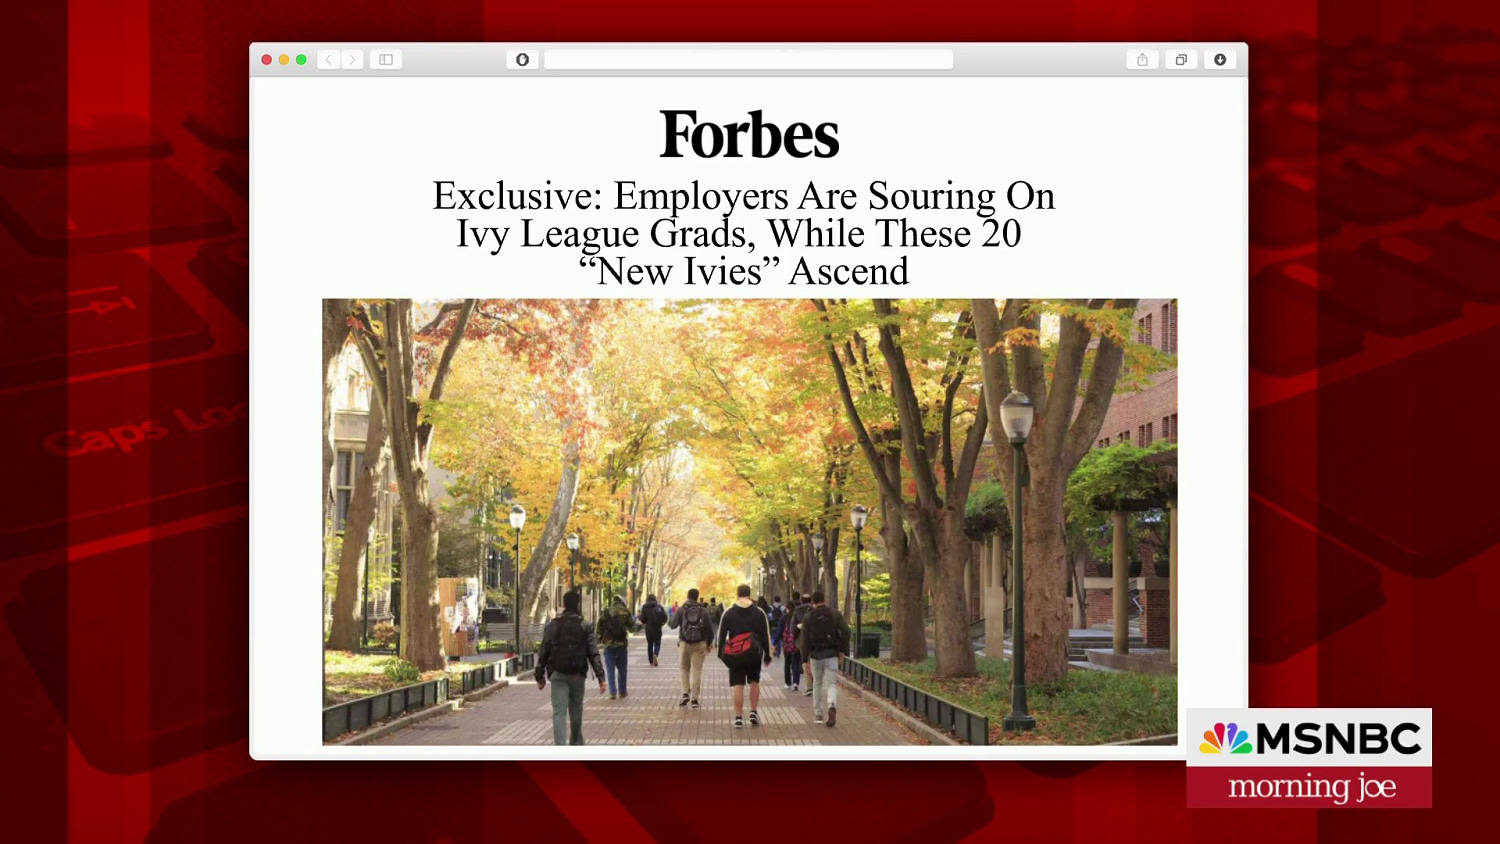 Why employers are souring on Ivy League graduates